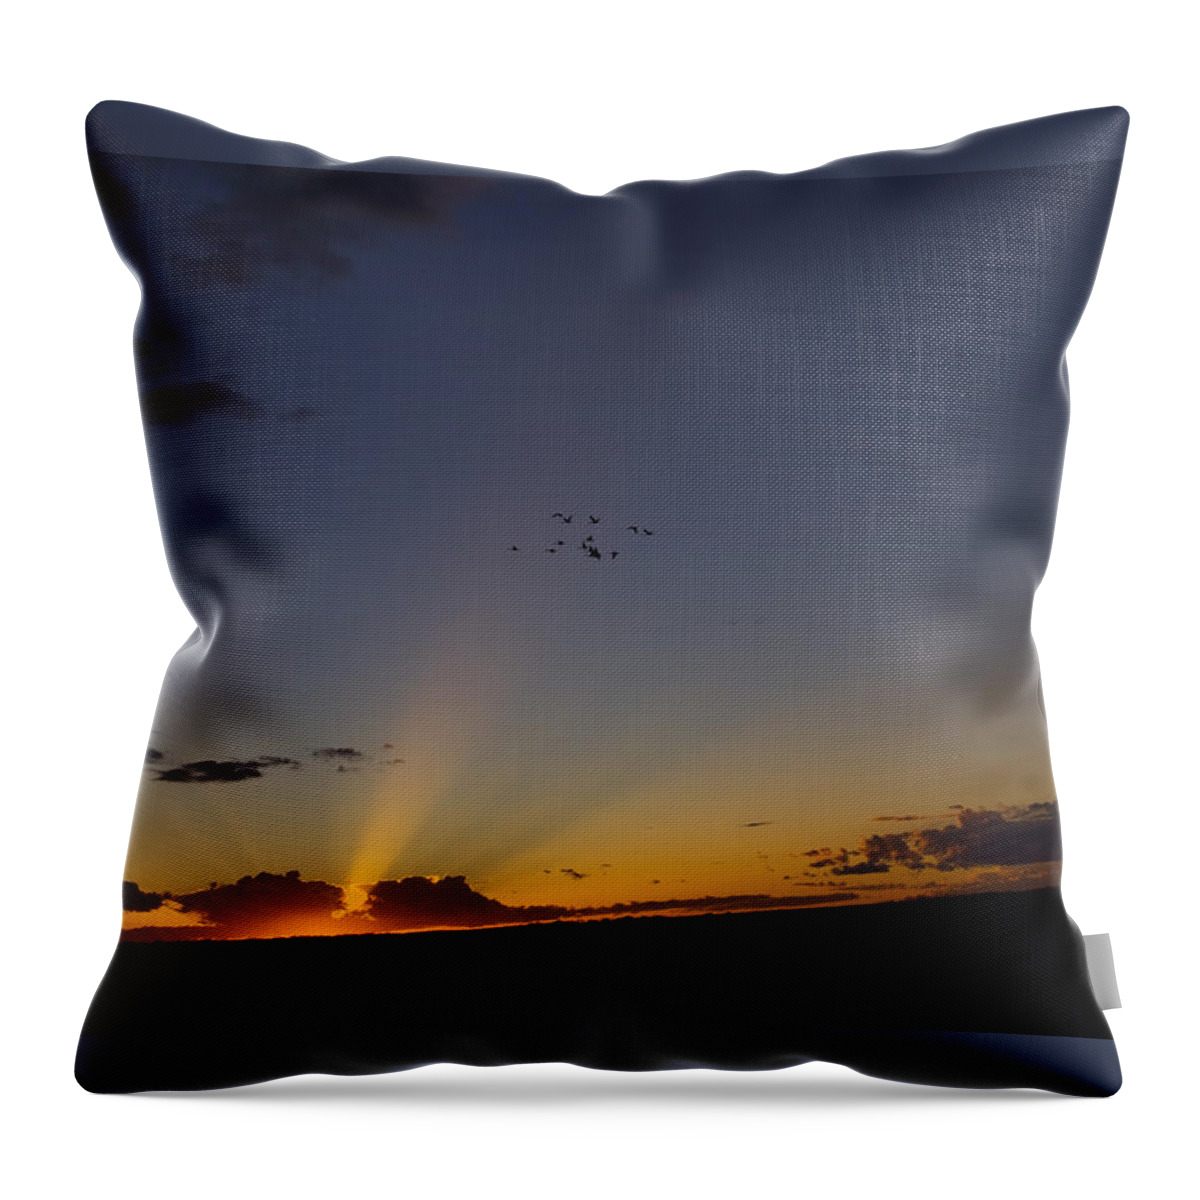 Photograph Throw Pillow featuring the photograph As Night Falls by Rhonda McDougall